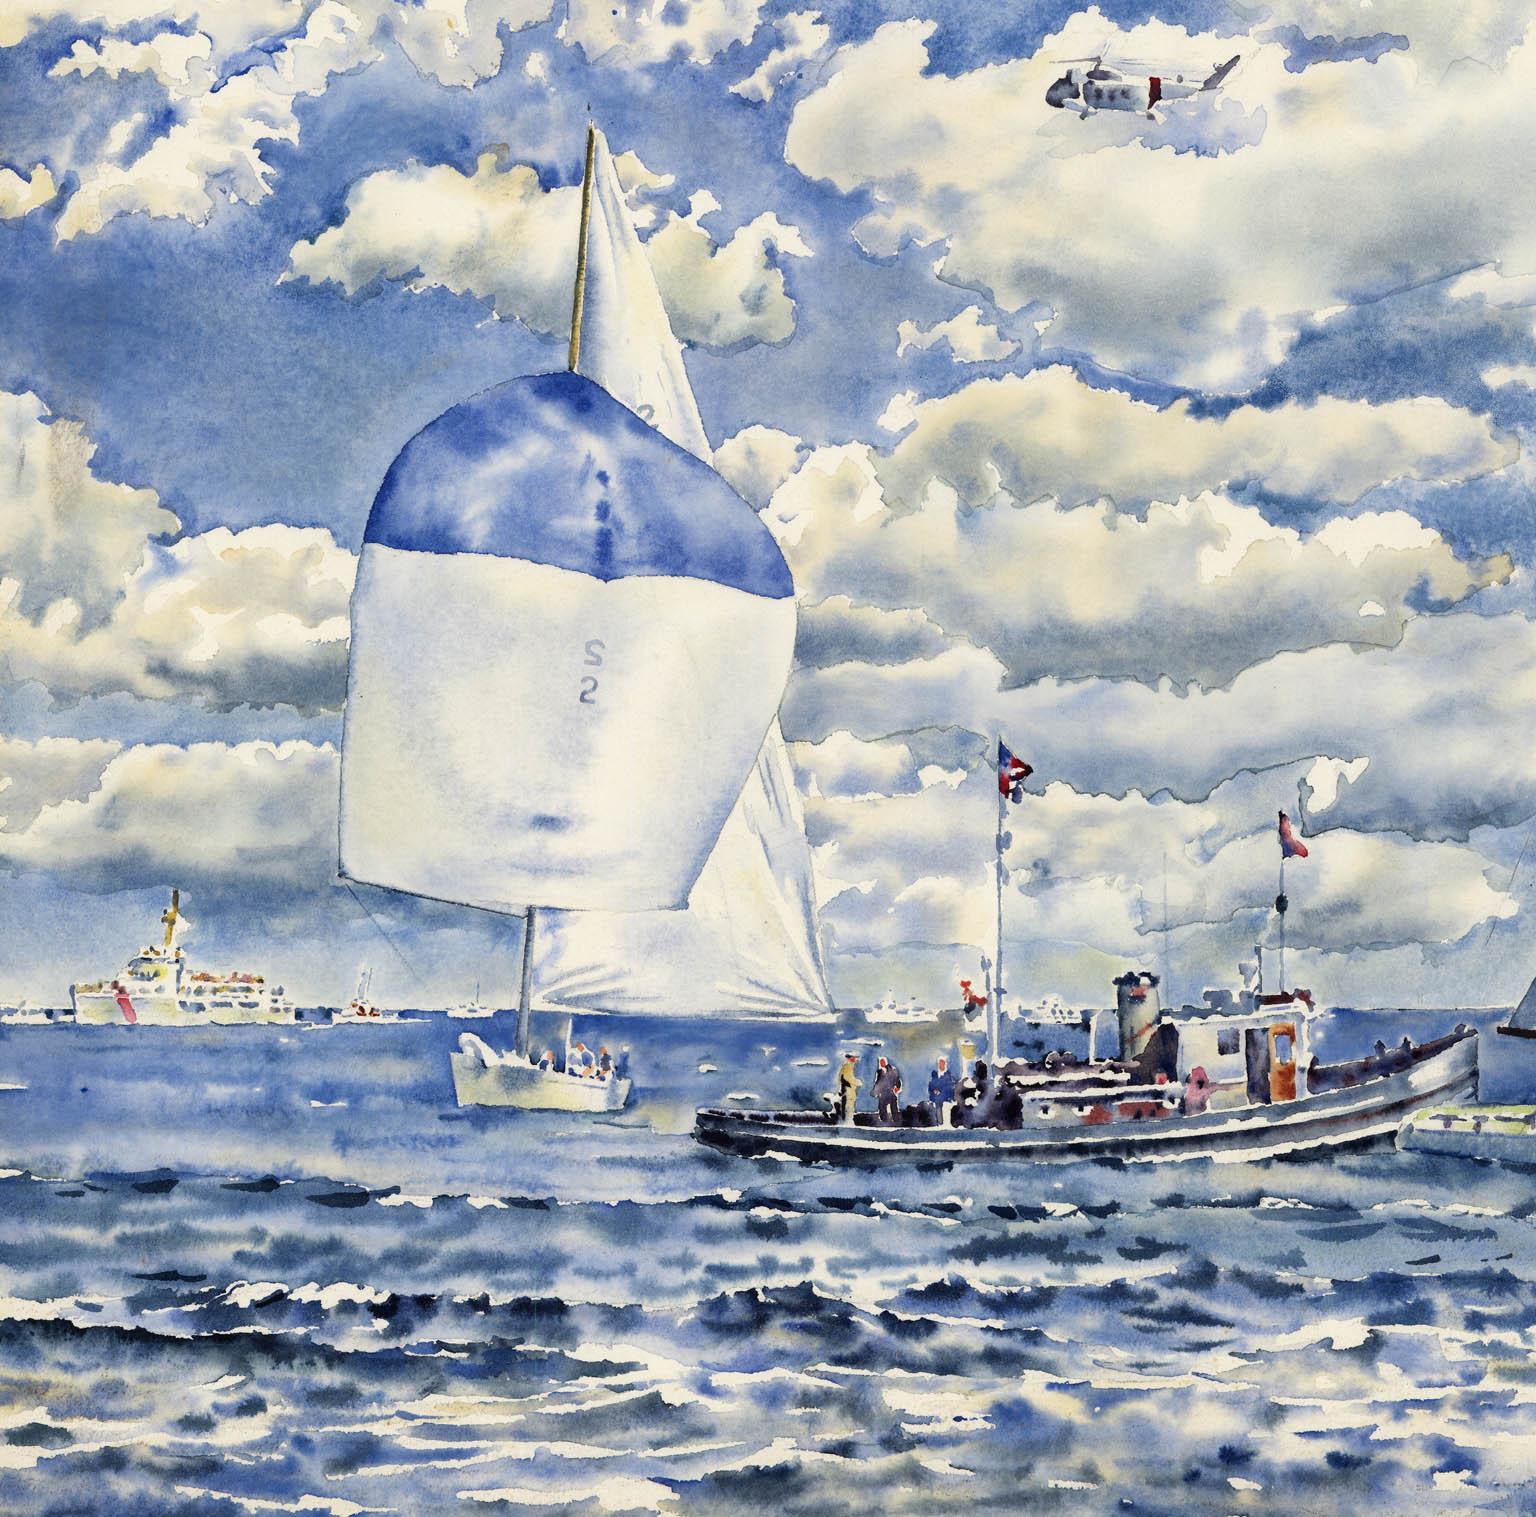 America's Cup - 1967.  Wing Mark, Intrepid and Dame Pattie. - Gray Landscape Art by Joseph Webster Golinkin